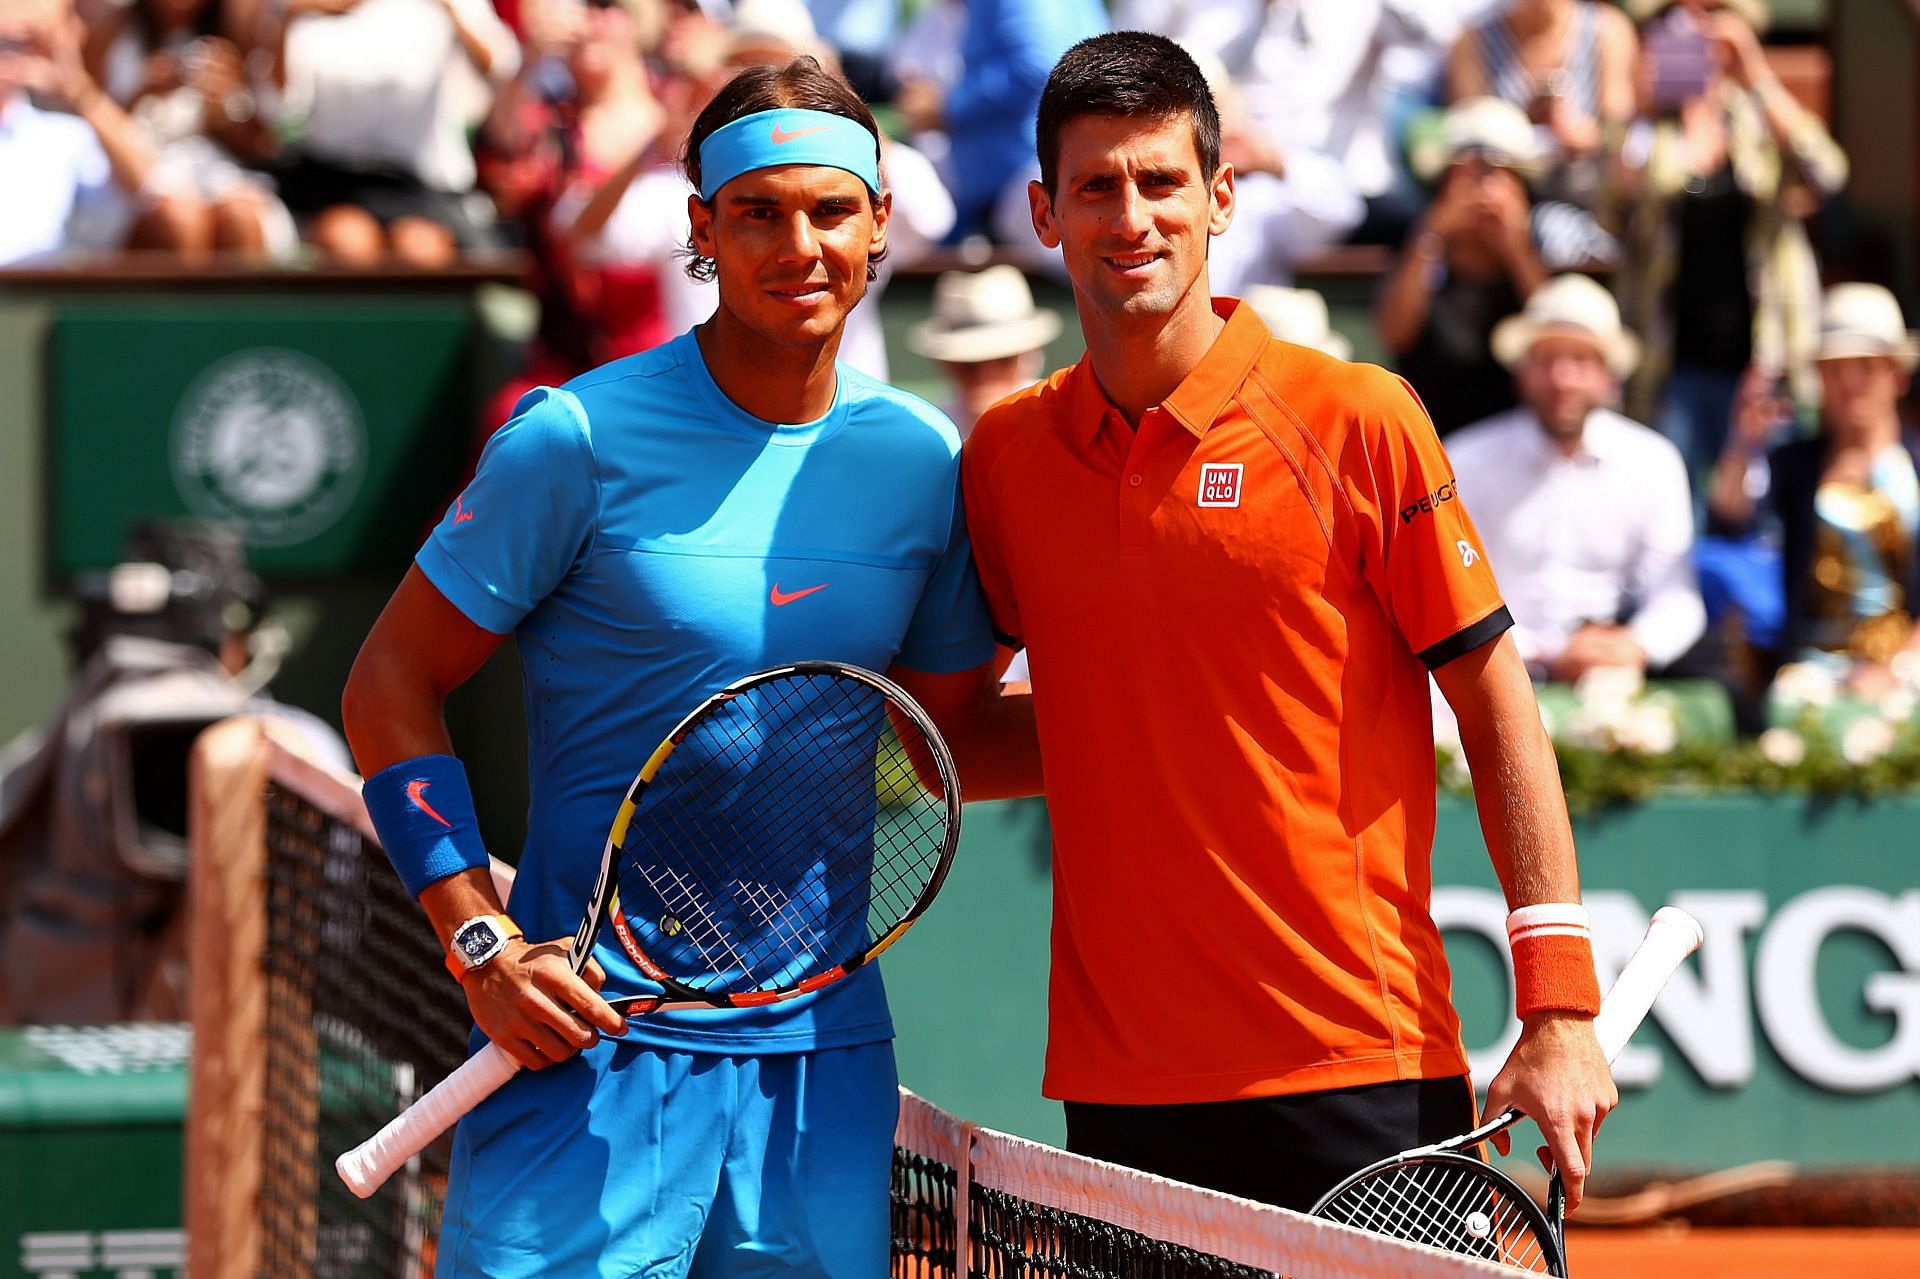 A photo from the French Open 2015.